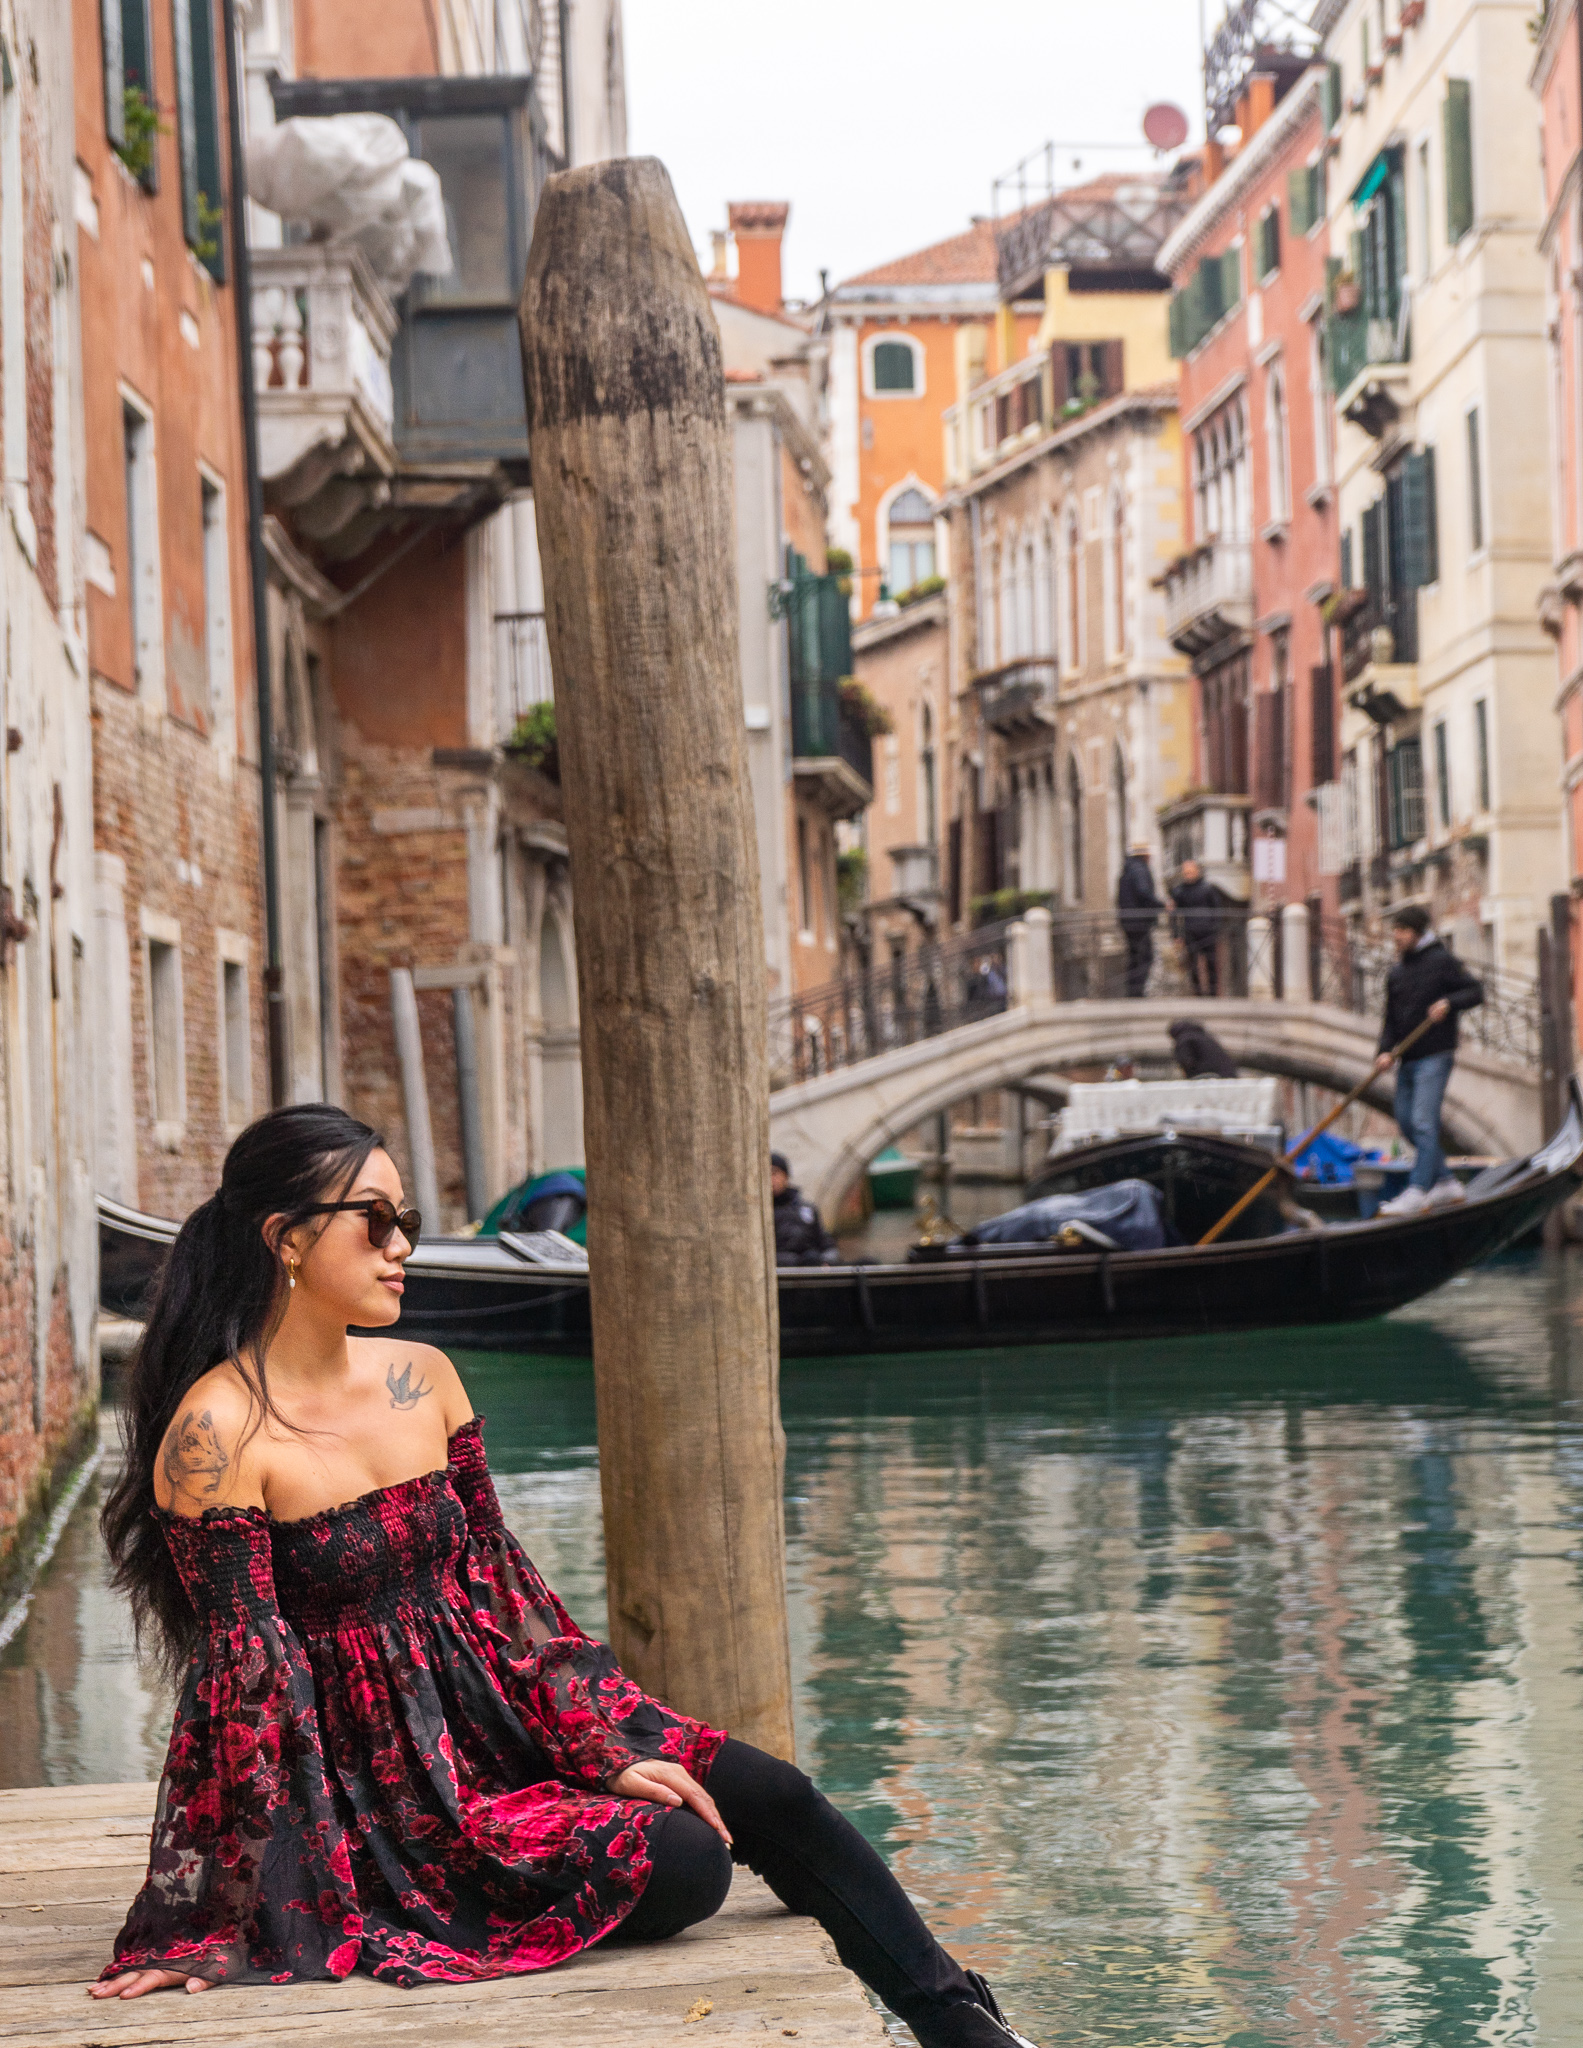 beautiful views from a canal in Venice with a gondola make Venice worth visiting